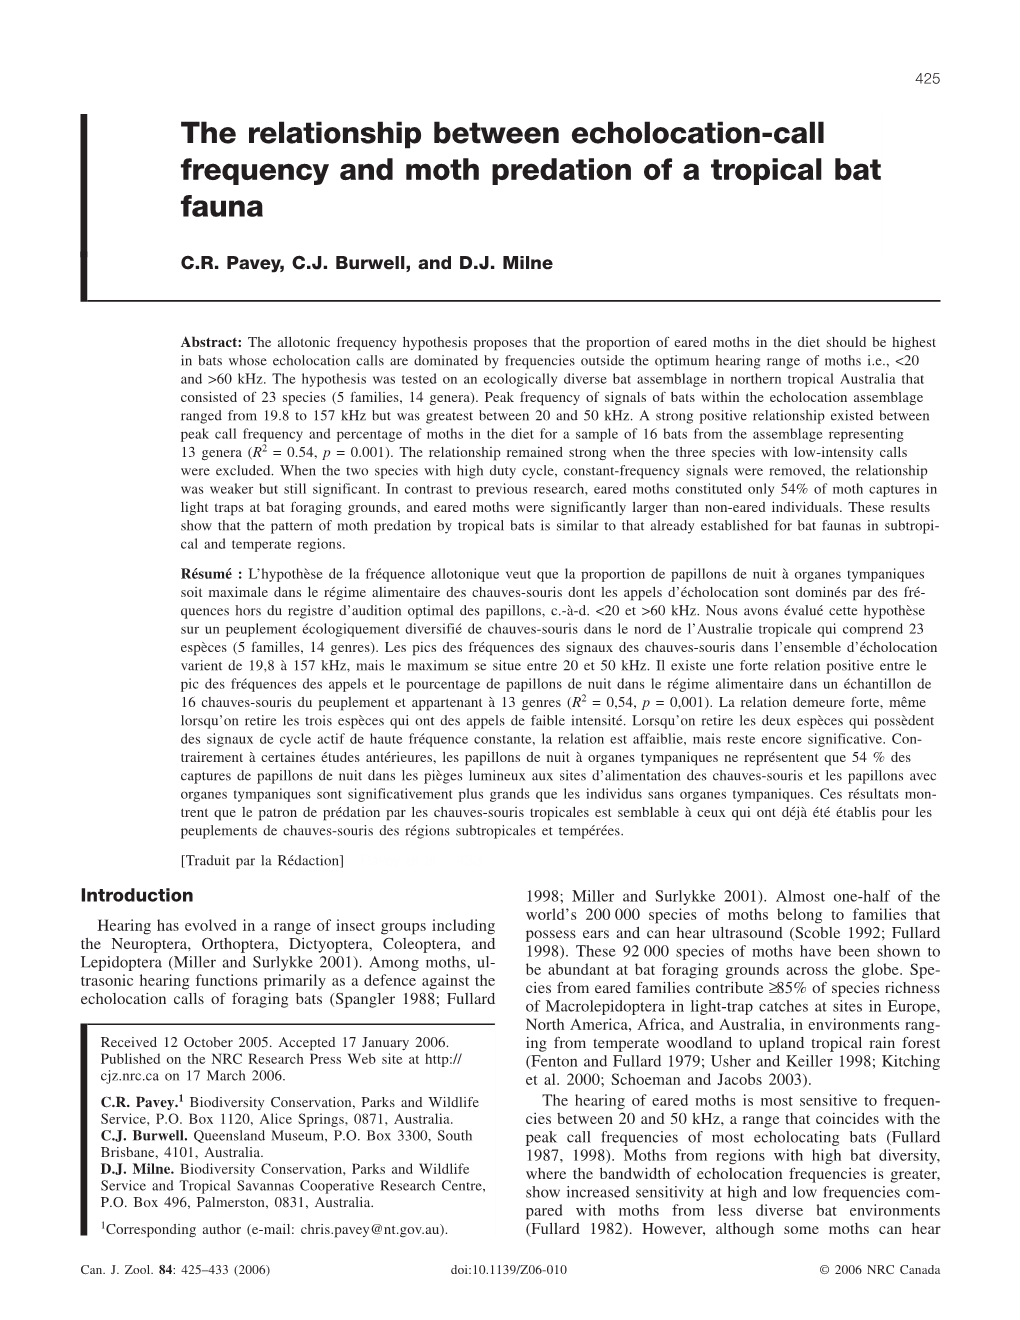 The Relationship Between Echolocation-Call Frequency and Moth Predation of a Tropical Bat Fauna